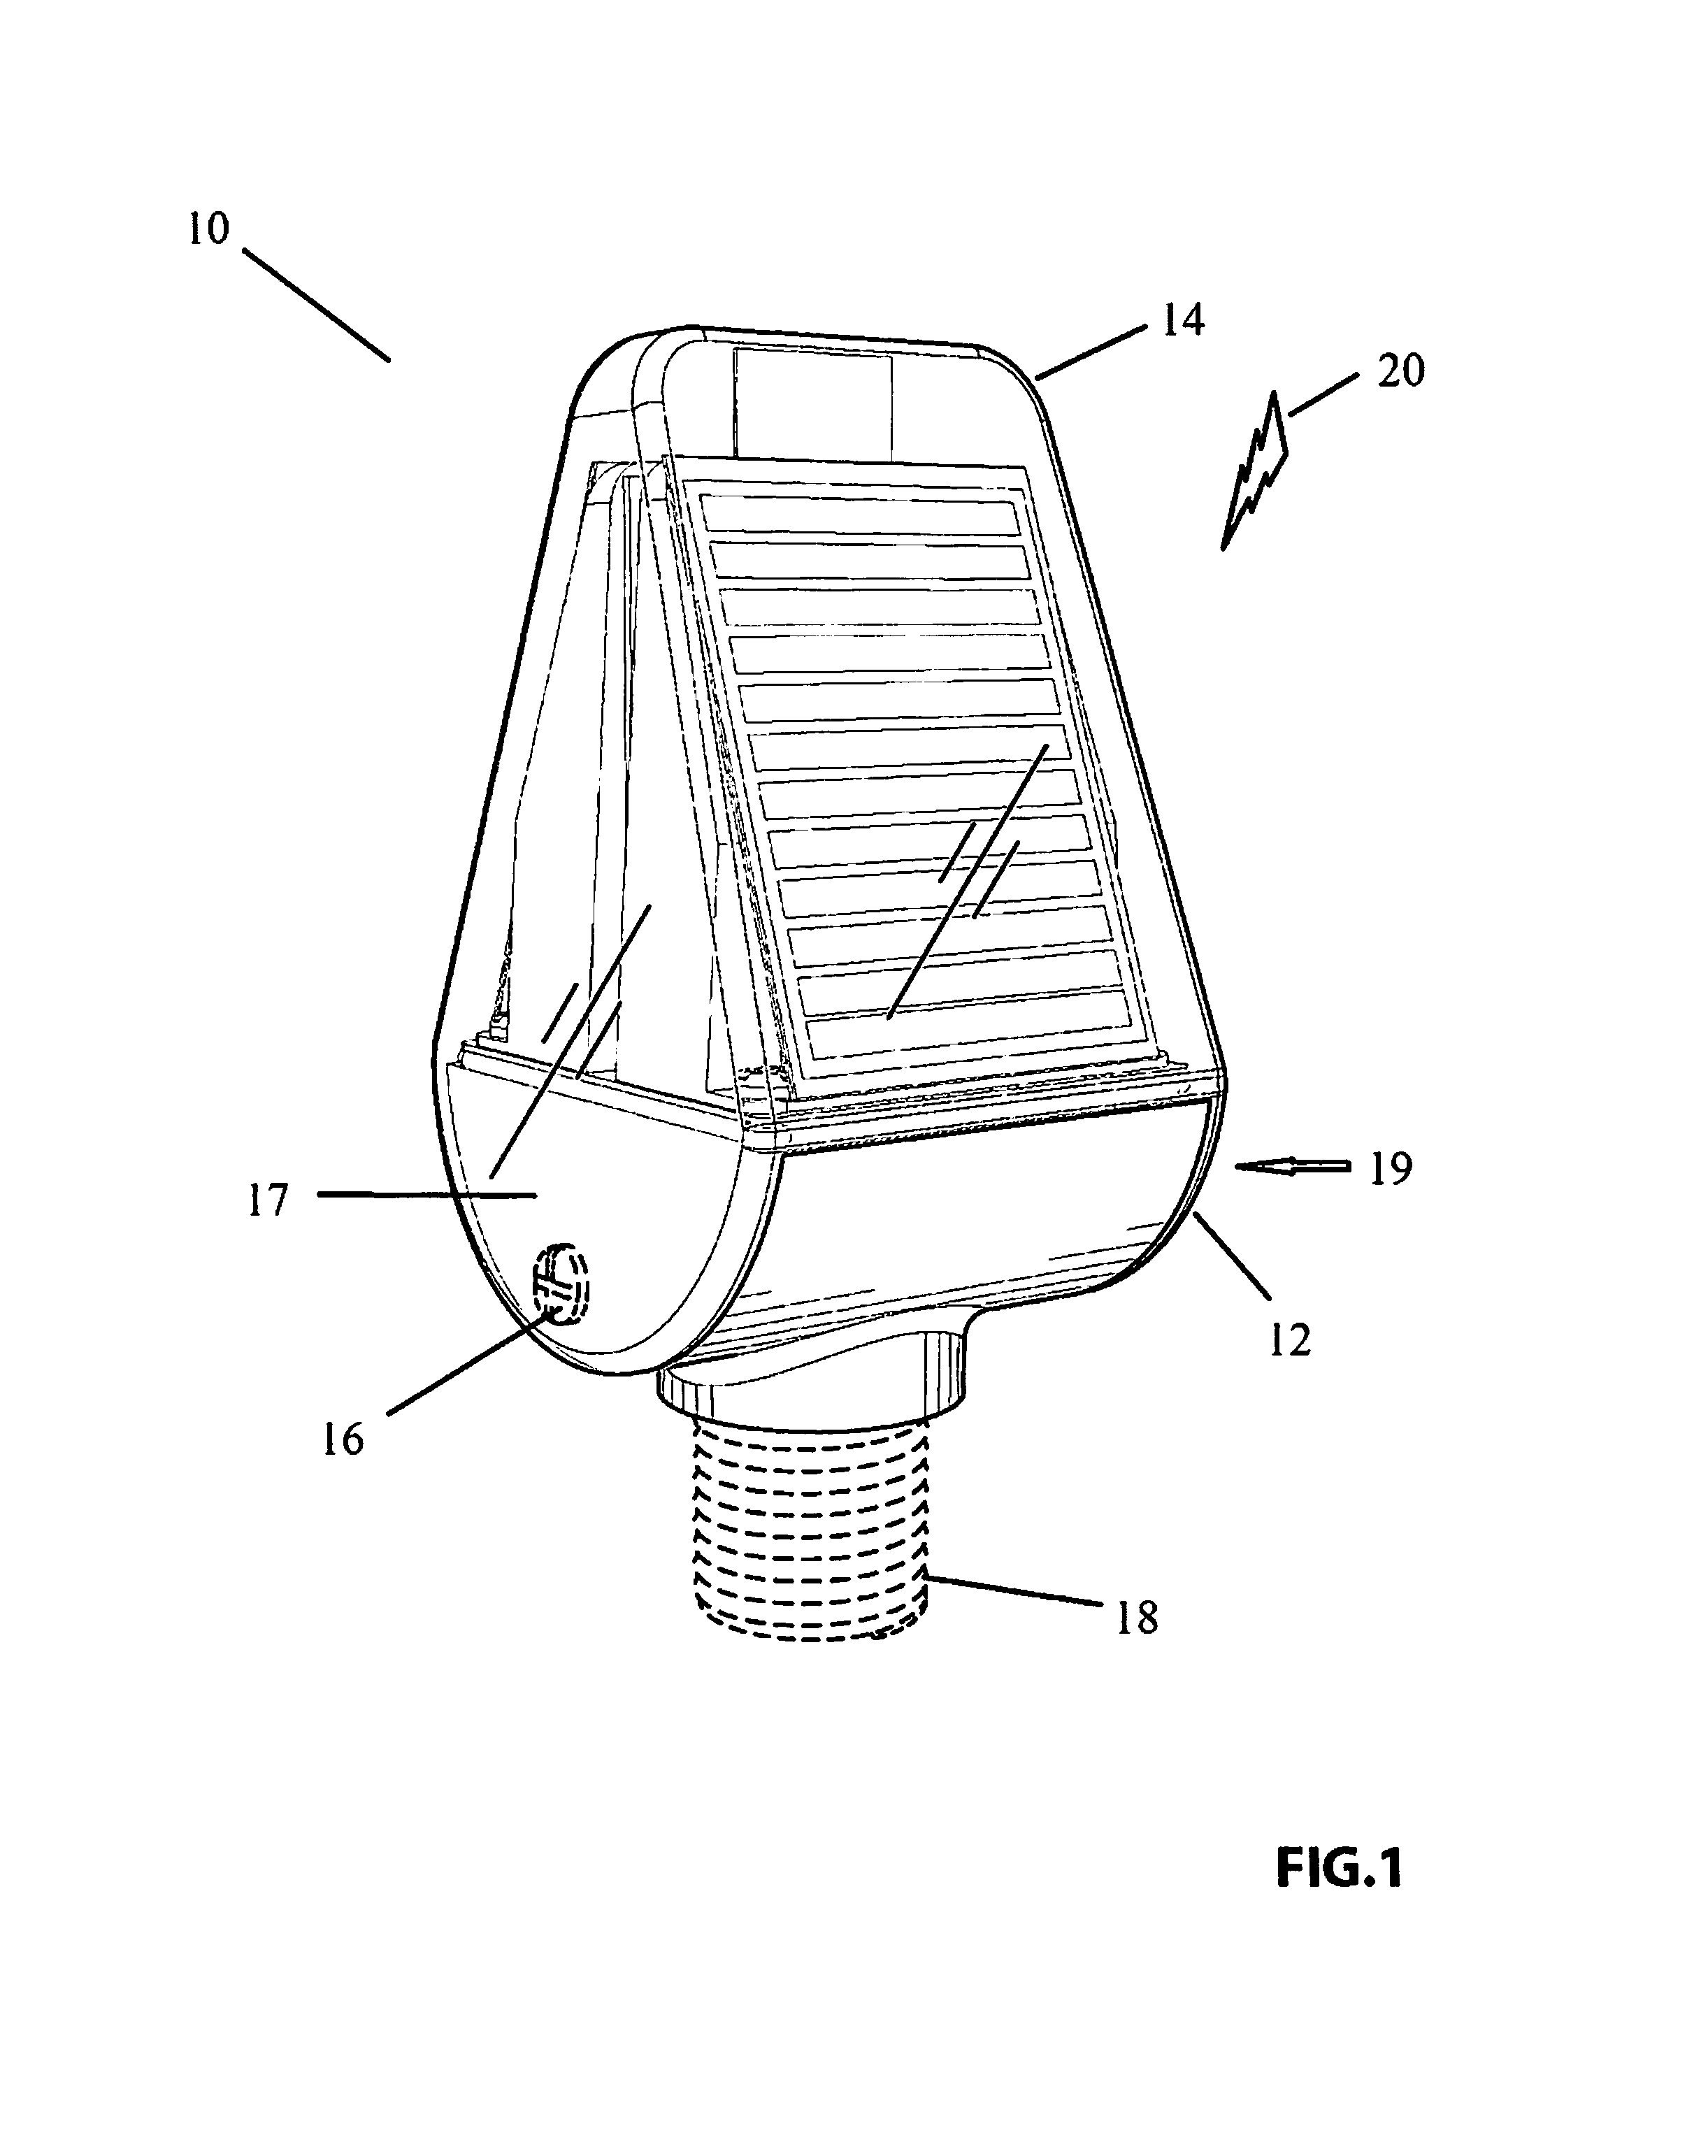 Remote sensing device and system for agricultural and other applications